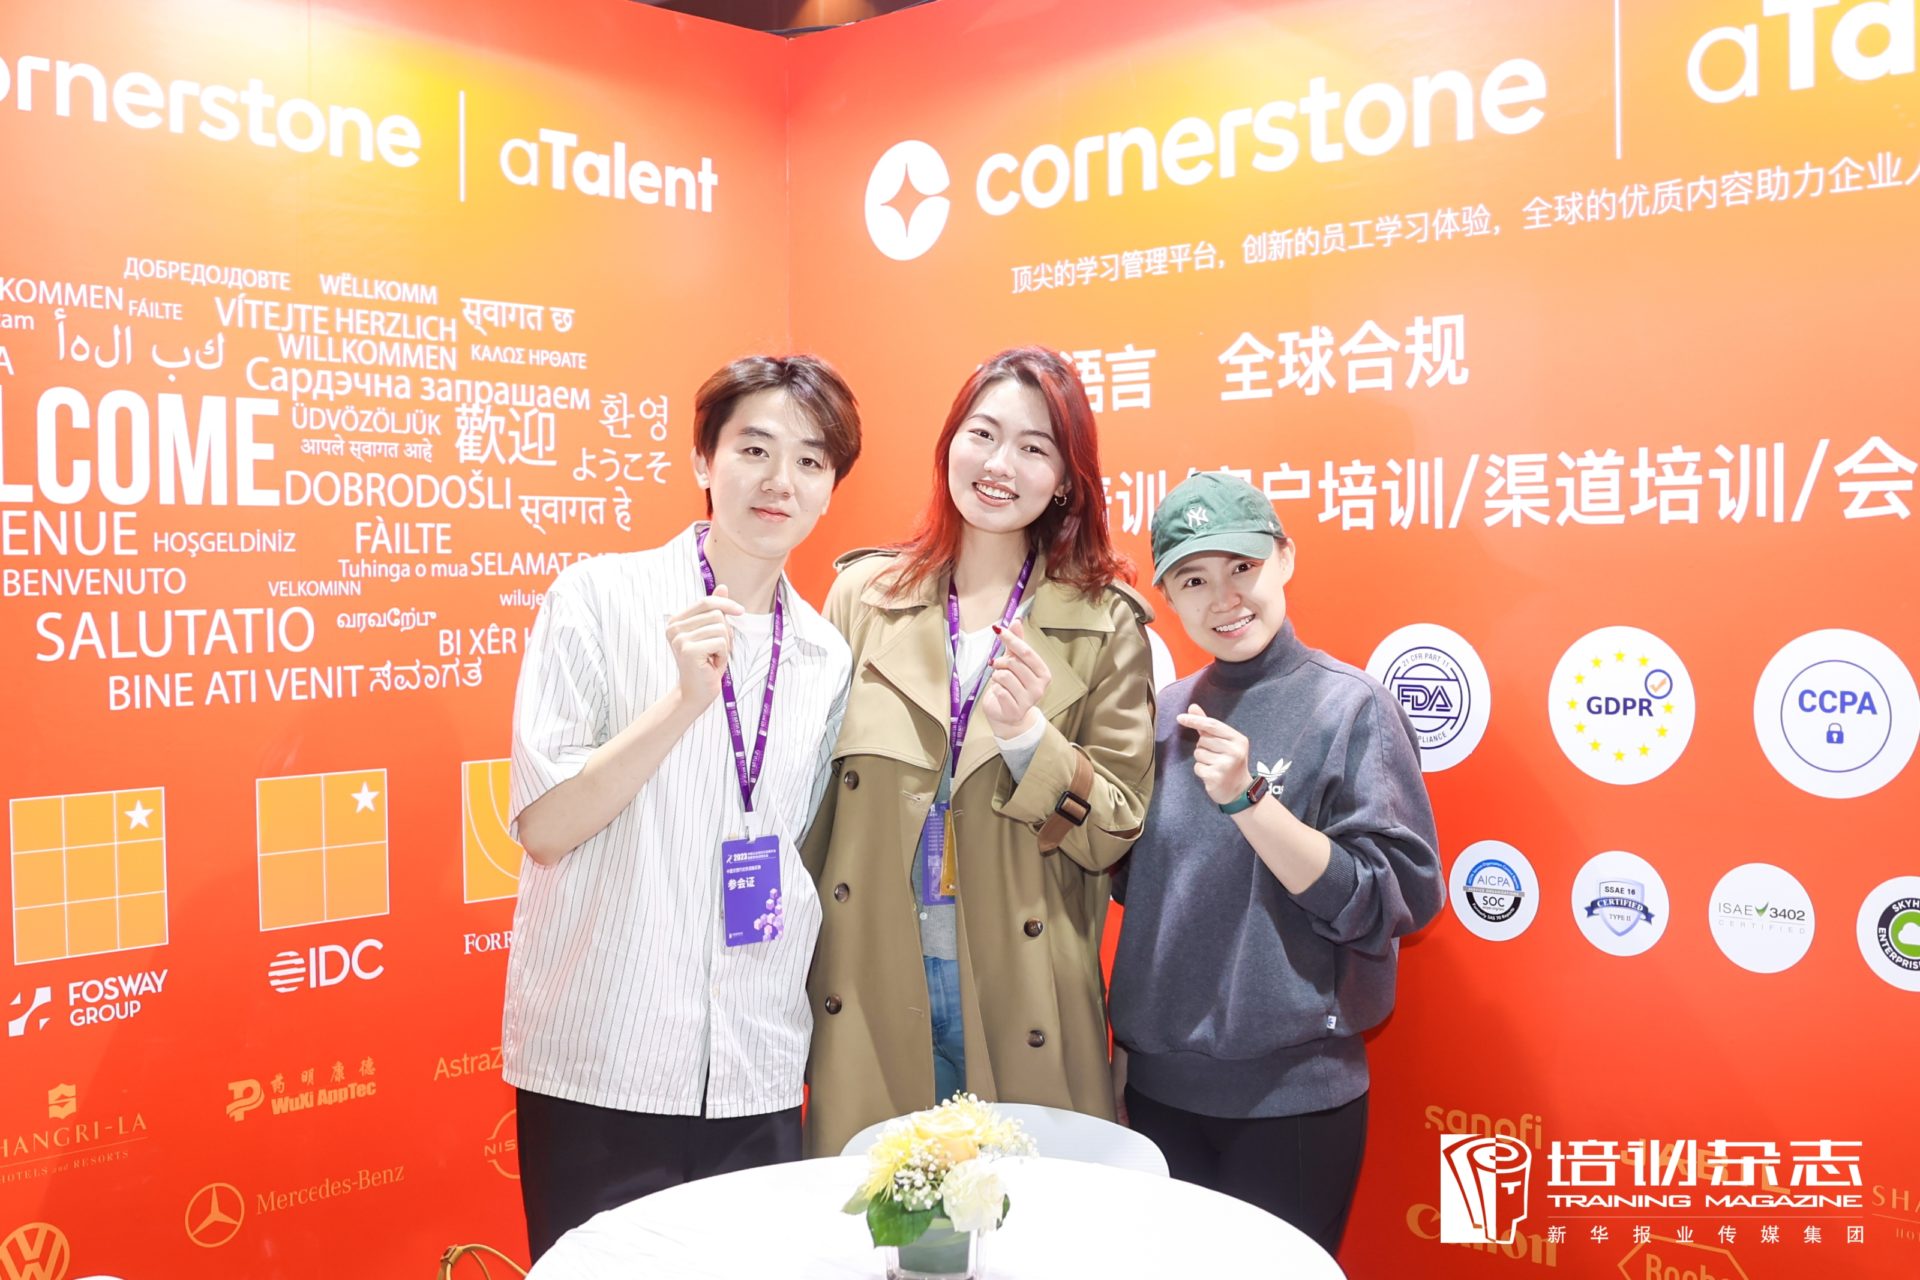 Gathering in Nanjing | Cornerstone OnDemand x aTalent Jointly Attend the 2023 Training Annual Conference and Education & Training Expo 插图1